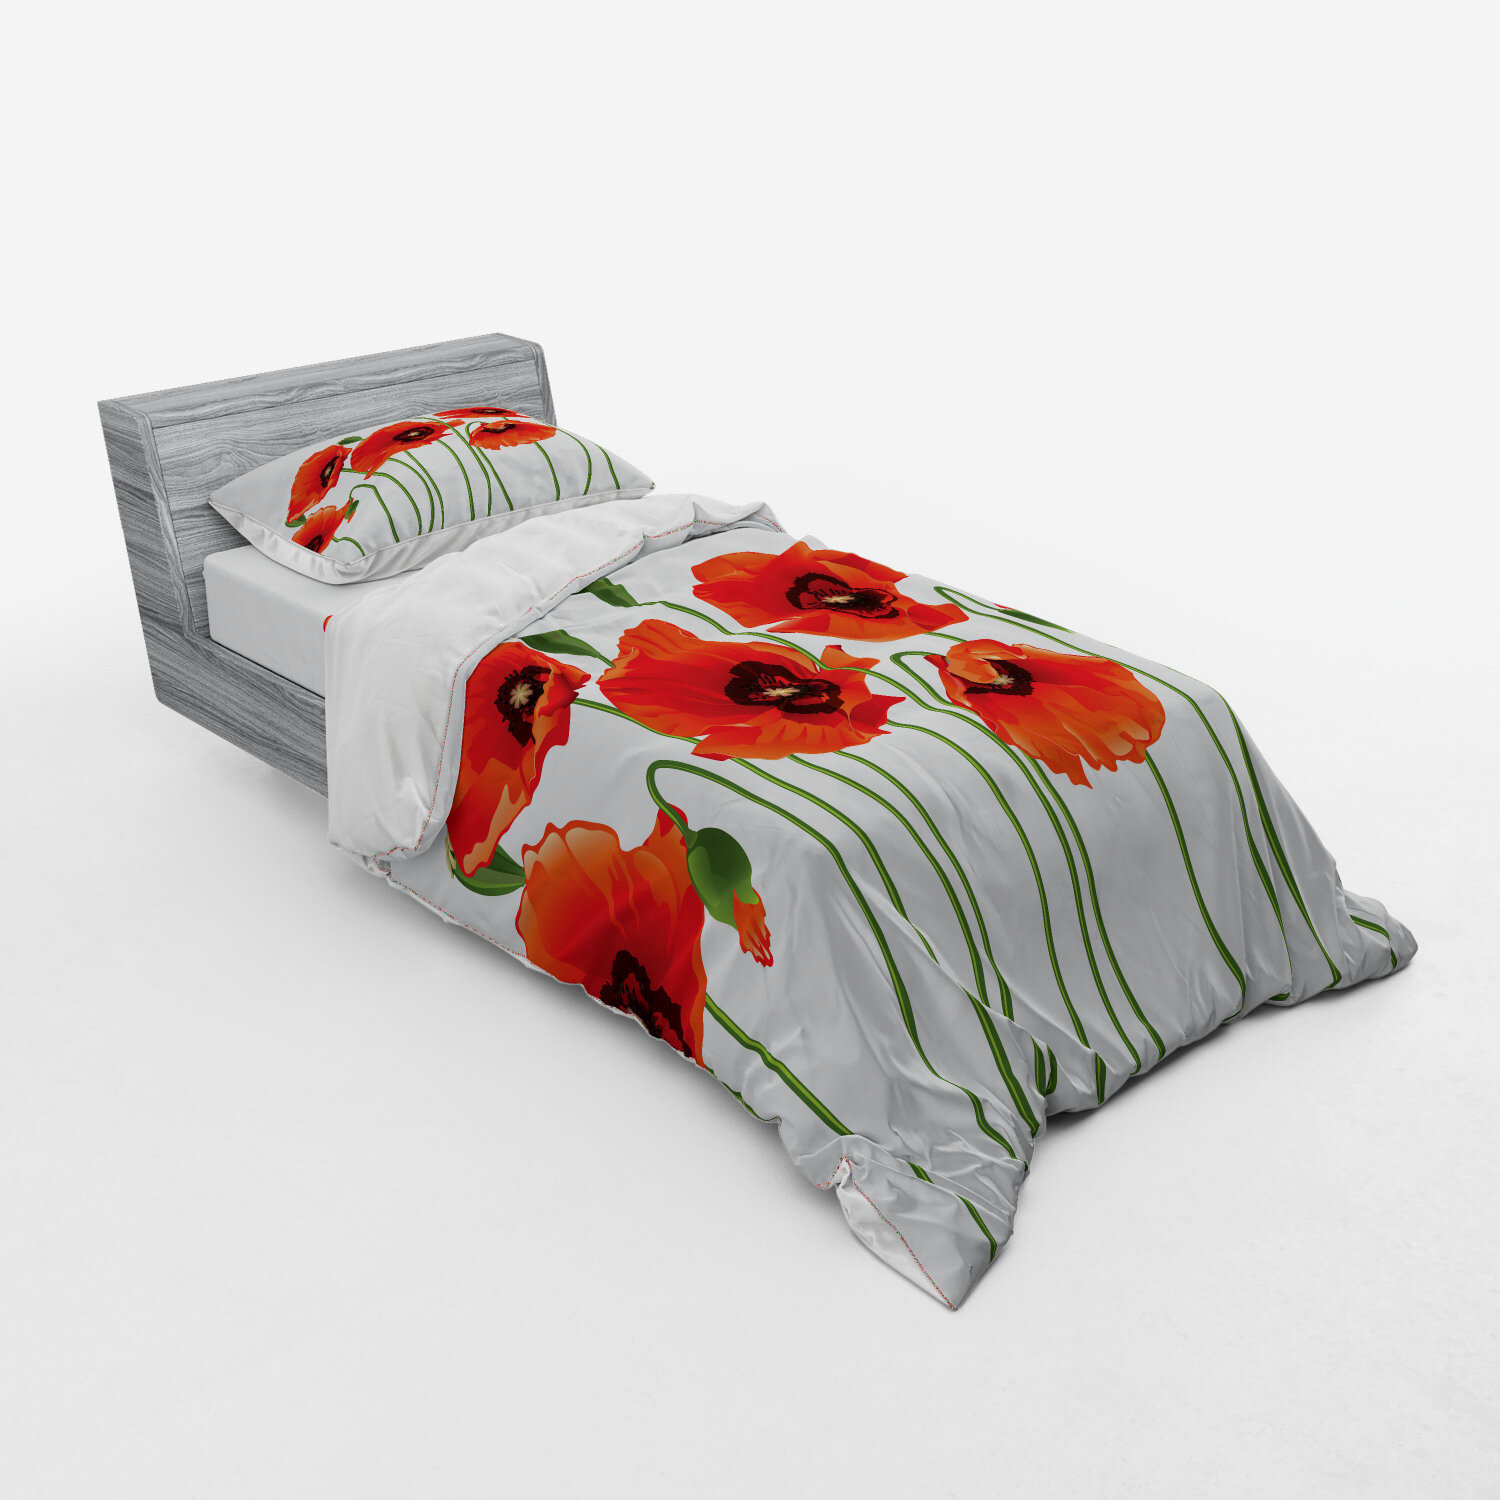 MEADOW POPPY DAISY RED KING SIZE COTTON BLEND REVERSIBLE DUVET COMFORTER COVER